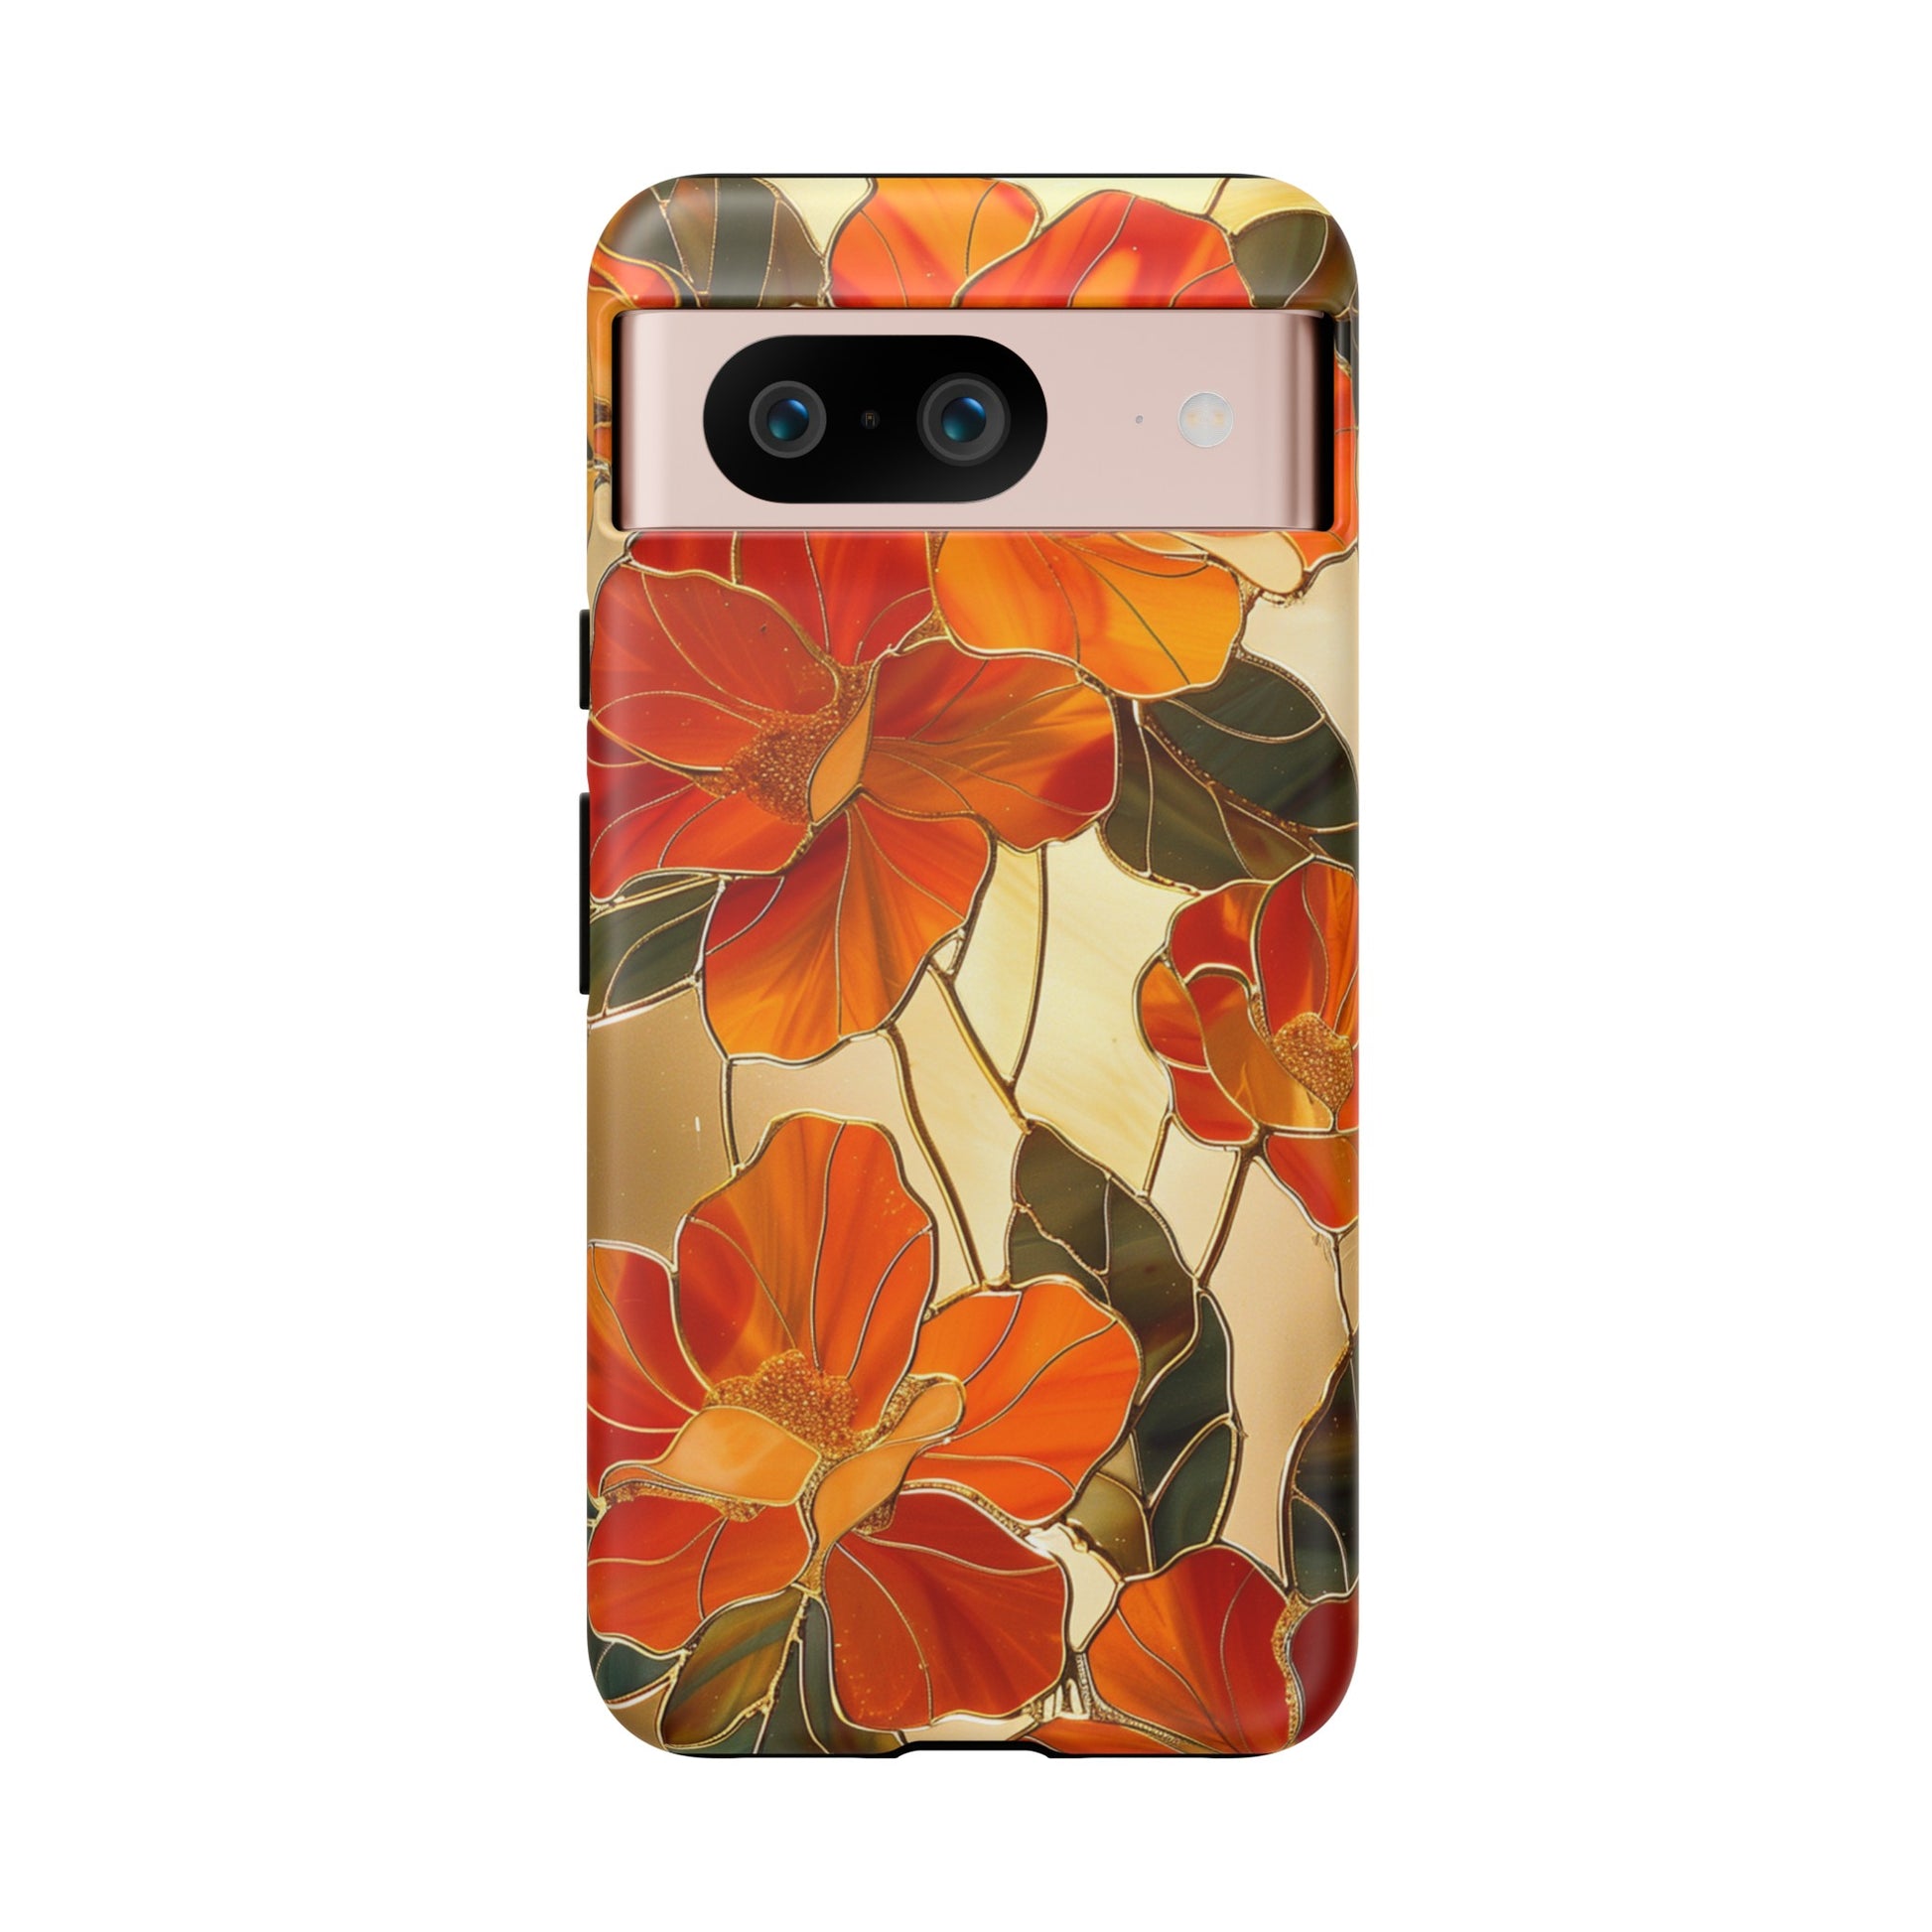 stained glass floral phone case for Google Pixel